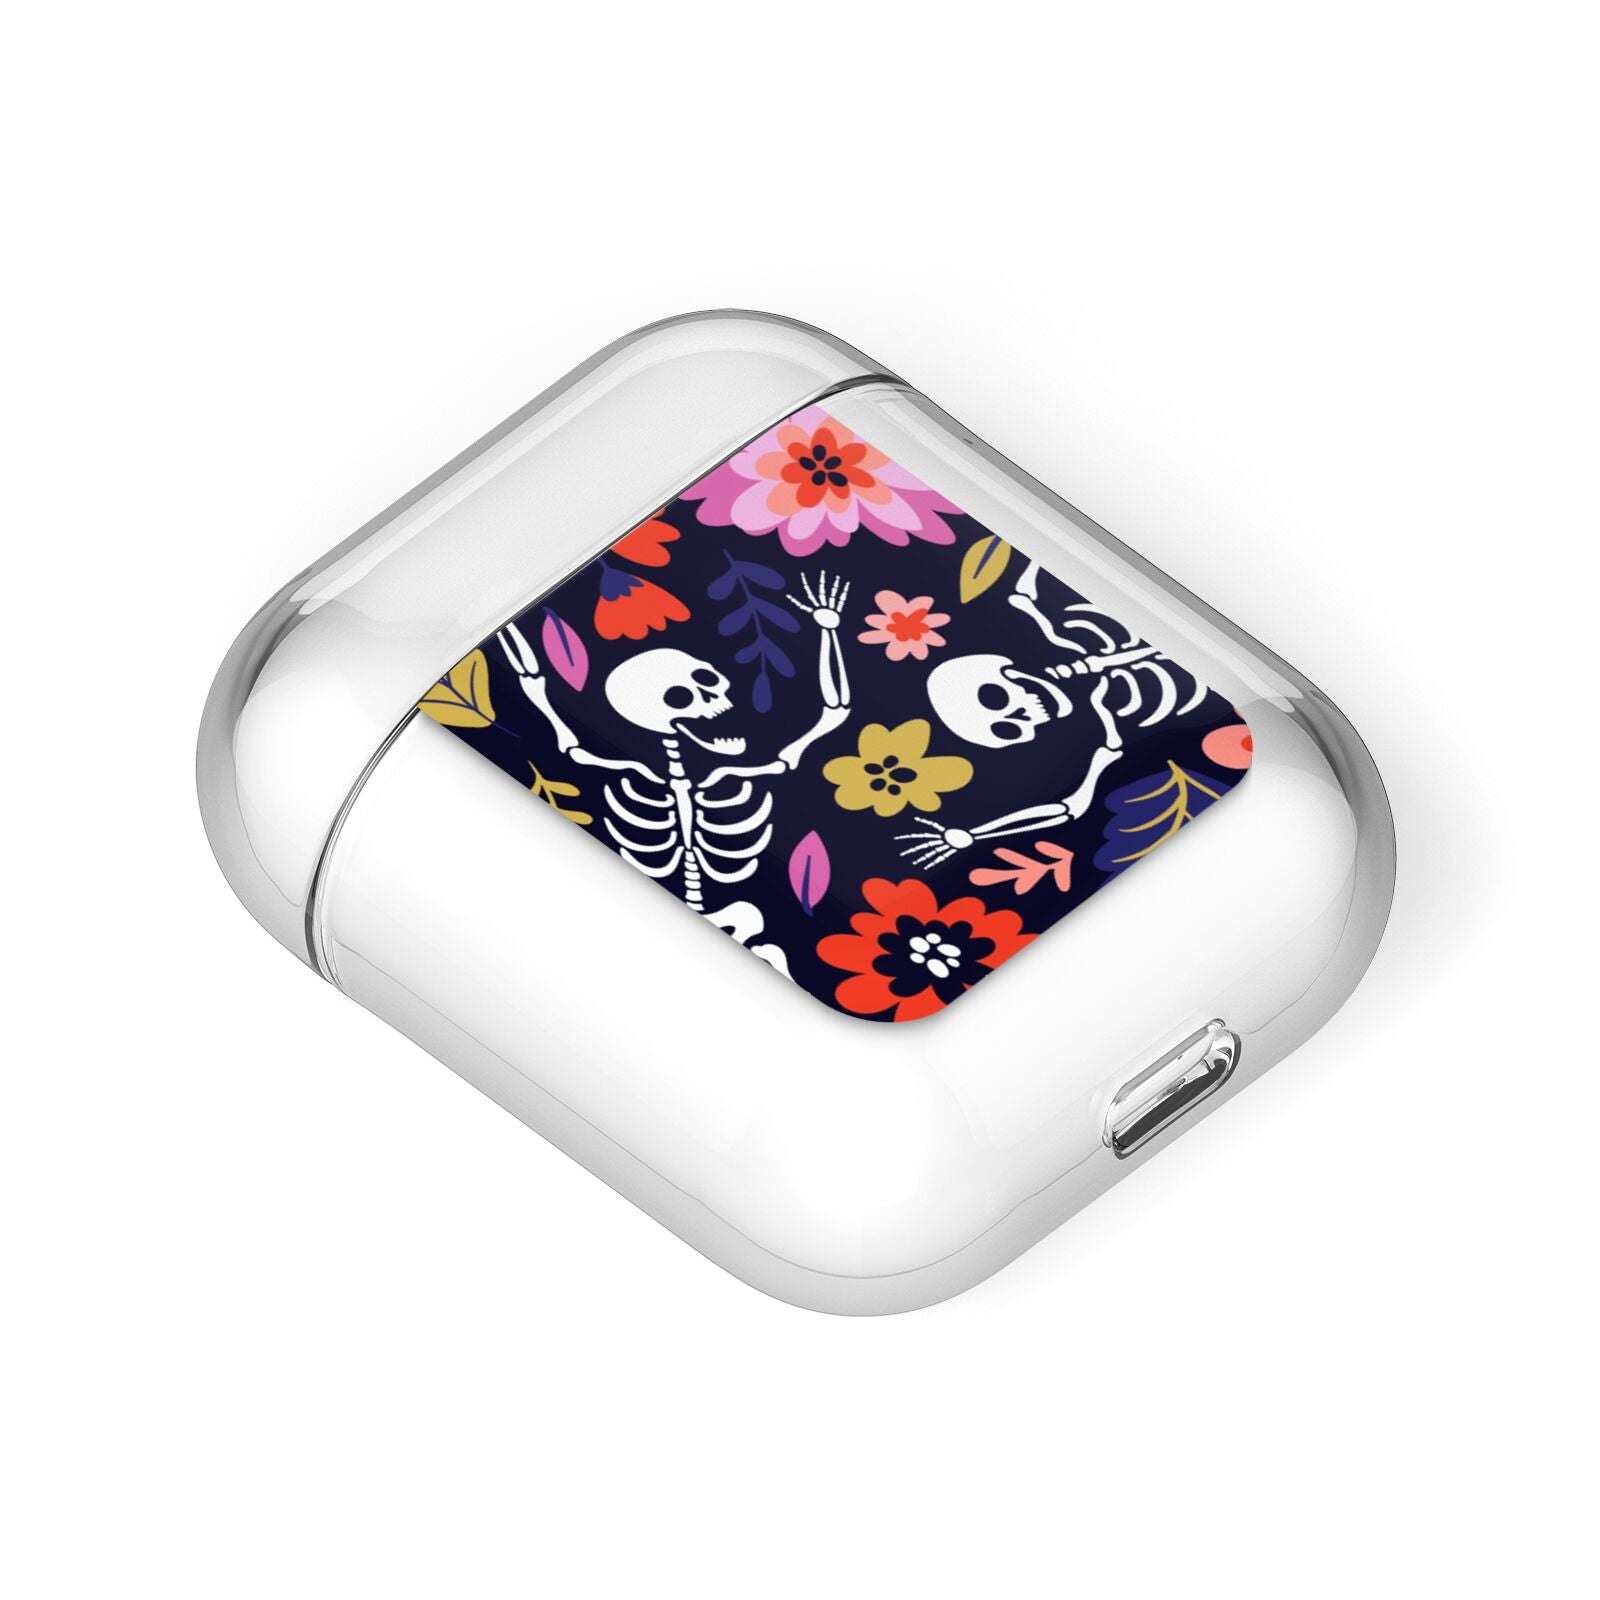 Floral Skeleton AirPods Case Laid Flat